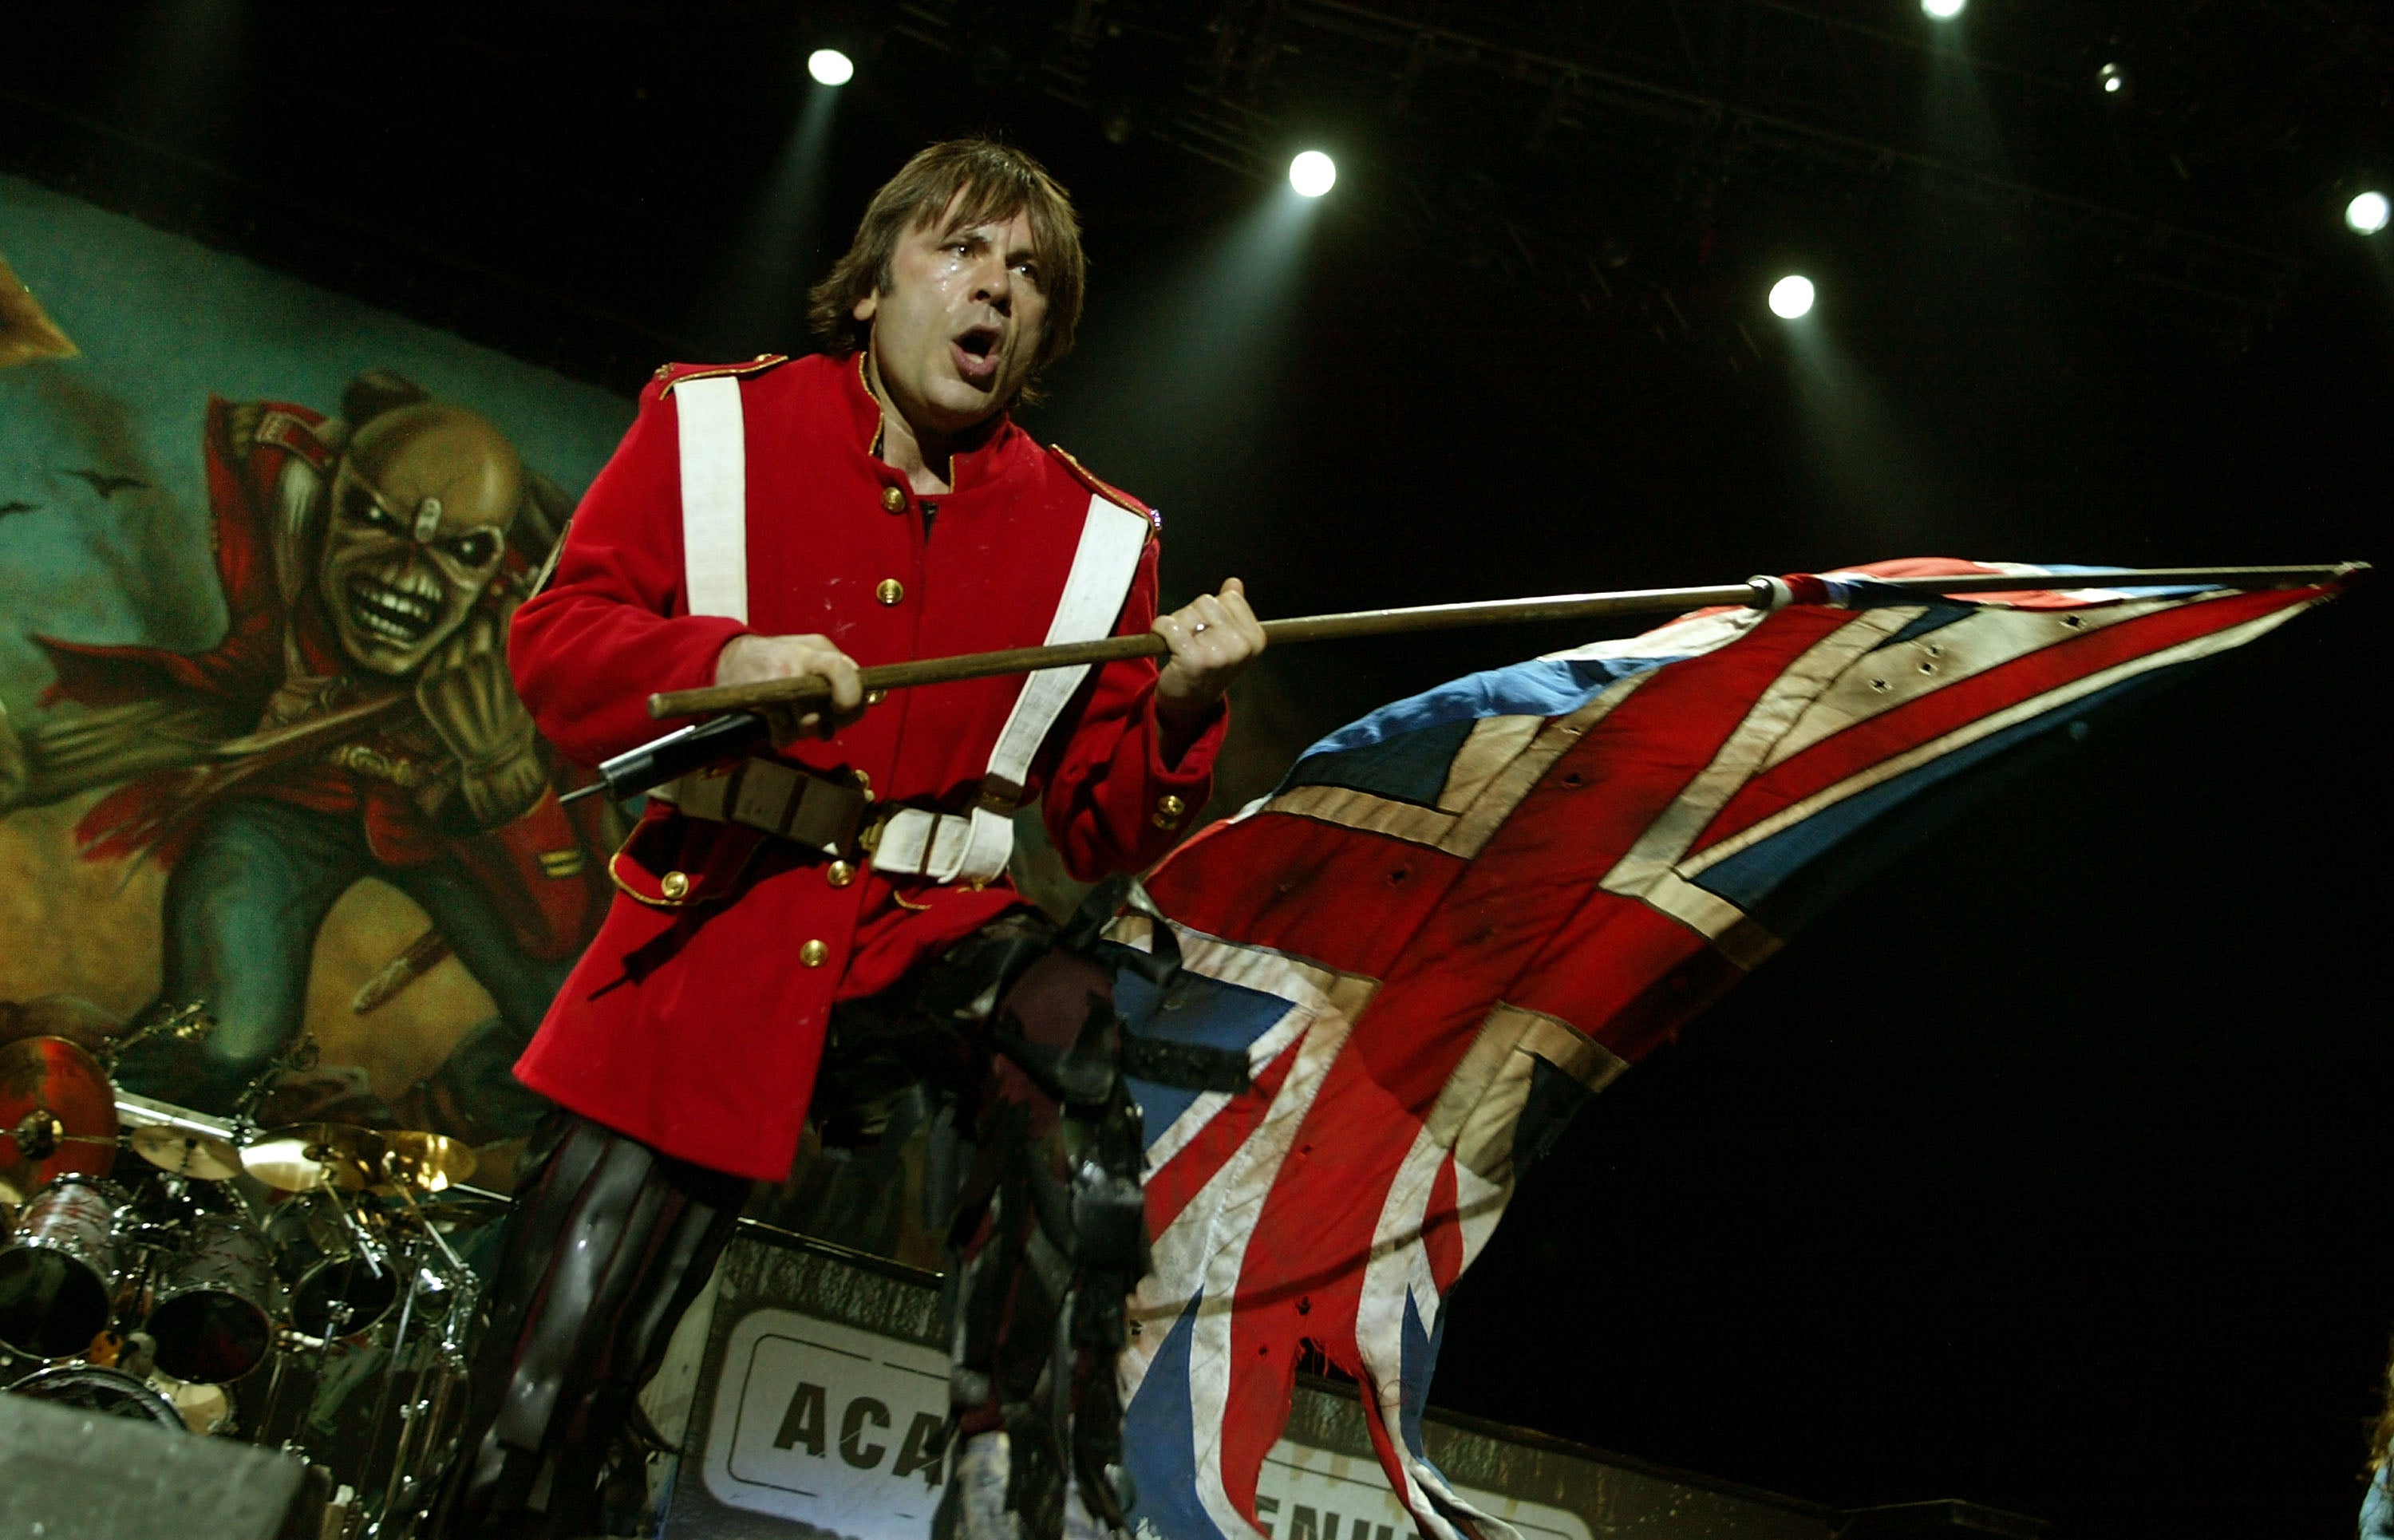 Iron Maiden's Bruce Dickinson opens up about his unusual skill